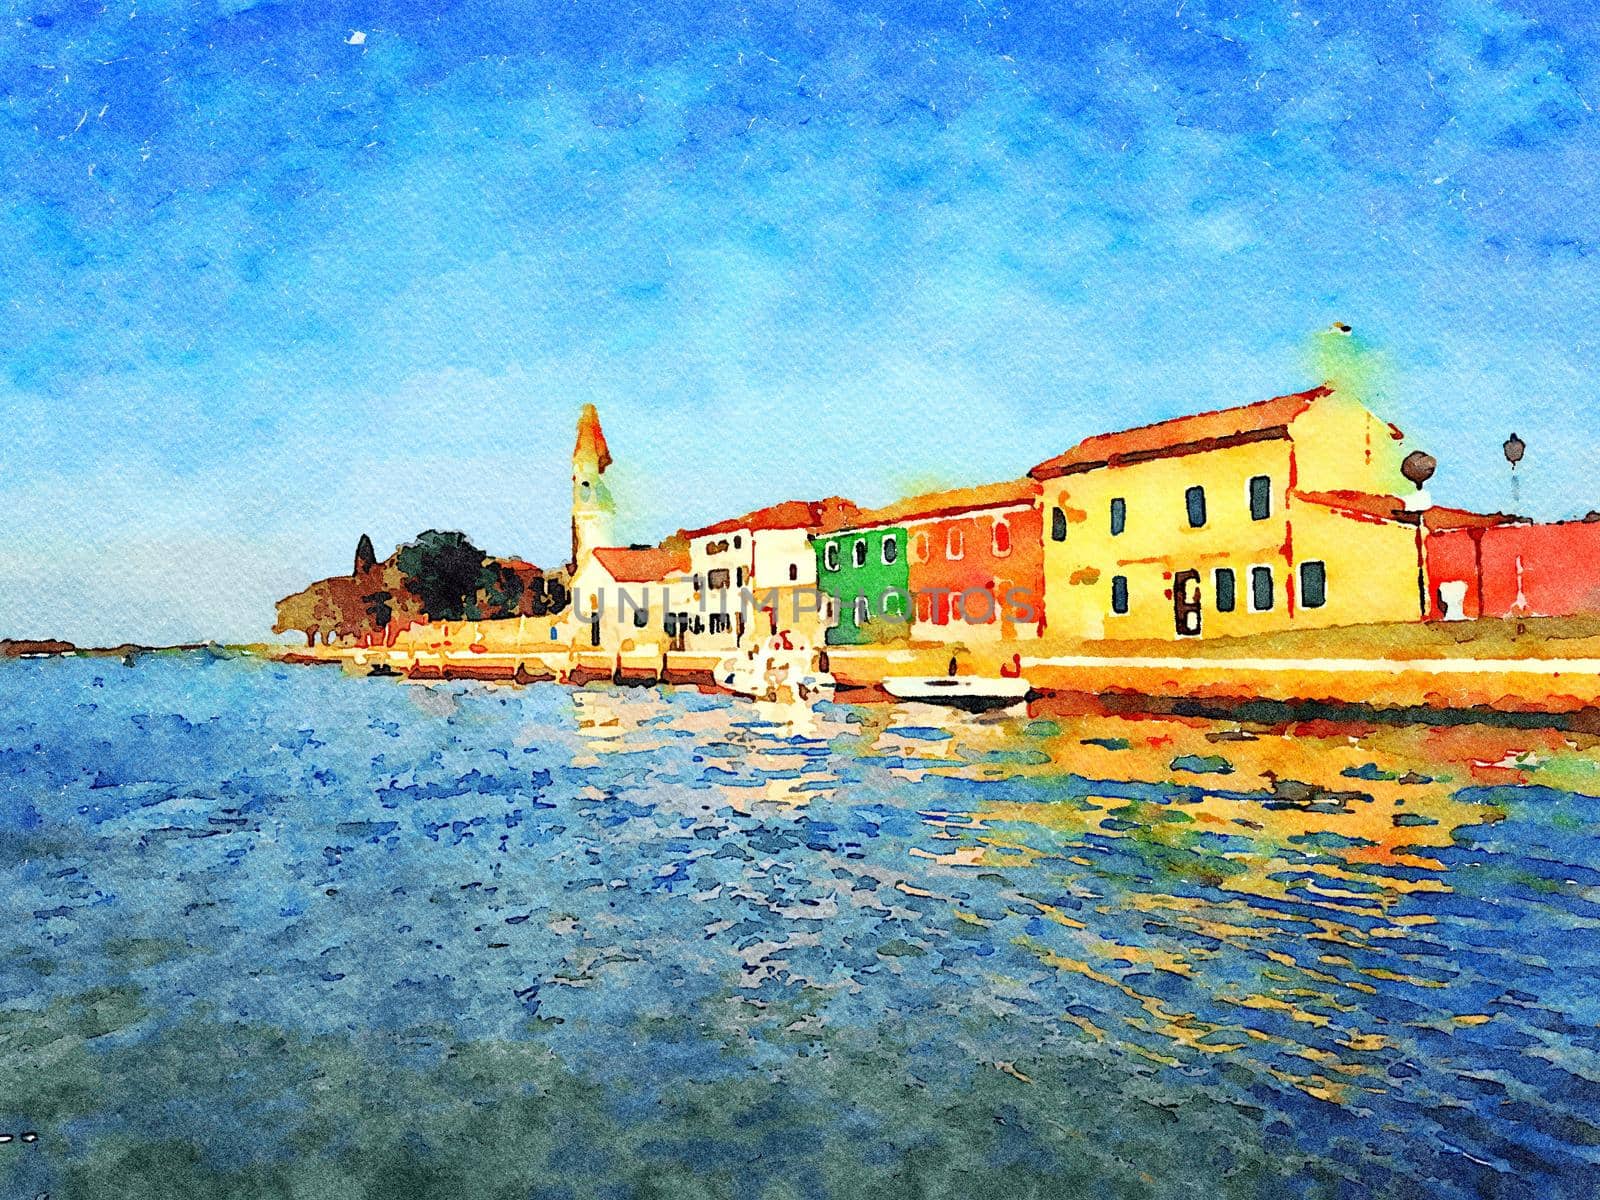 Watercolor which represents a glimpse of the historic buildings overlooking the Venice lagoon